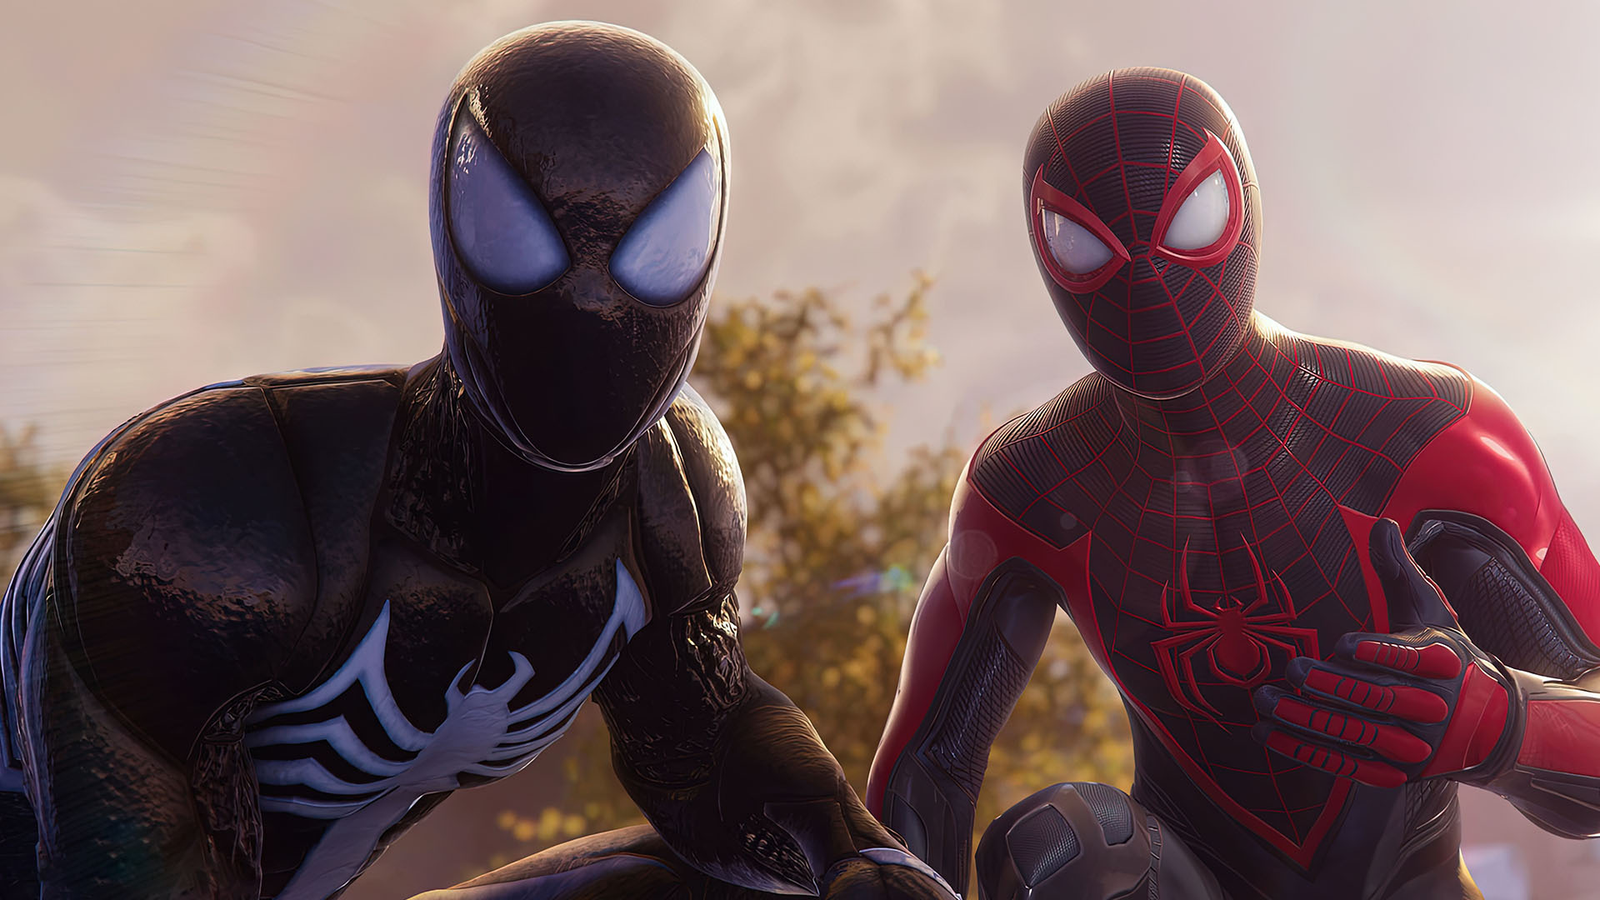 Marvel's Spider-Man: Miles Morales is the perfect PS5 launch title - CNET